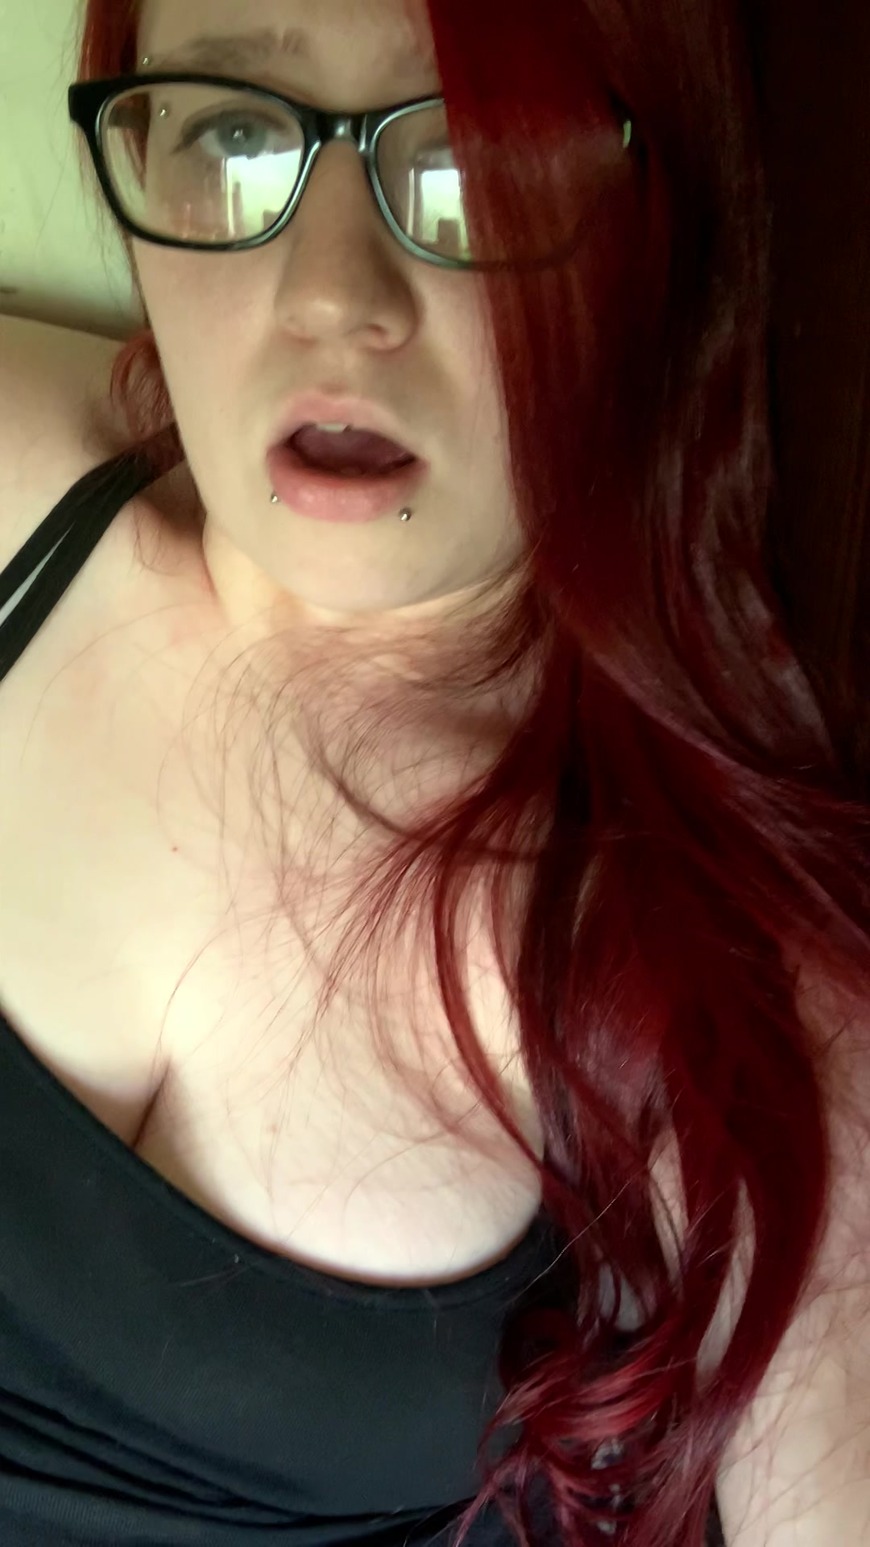 You can watch me cum while I play with myself ðŸ˜˜ you can tell on my face - clip coverforeground